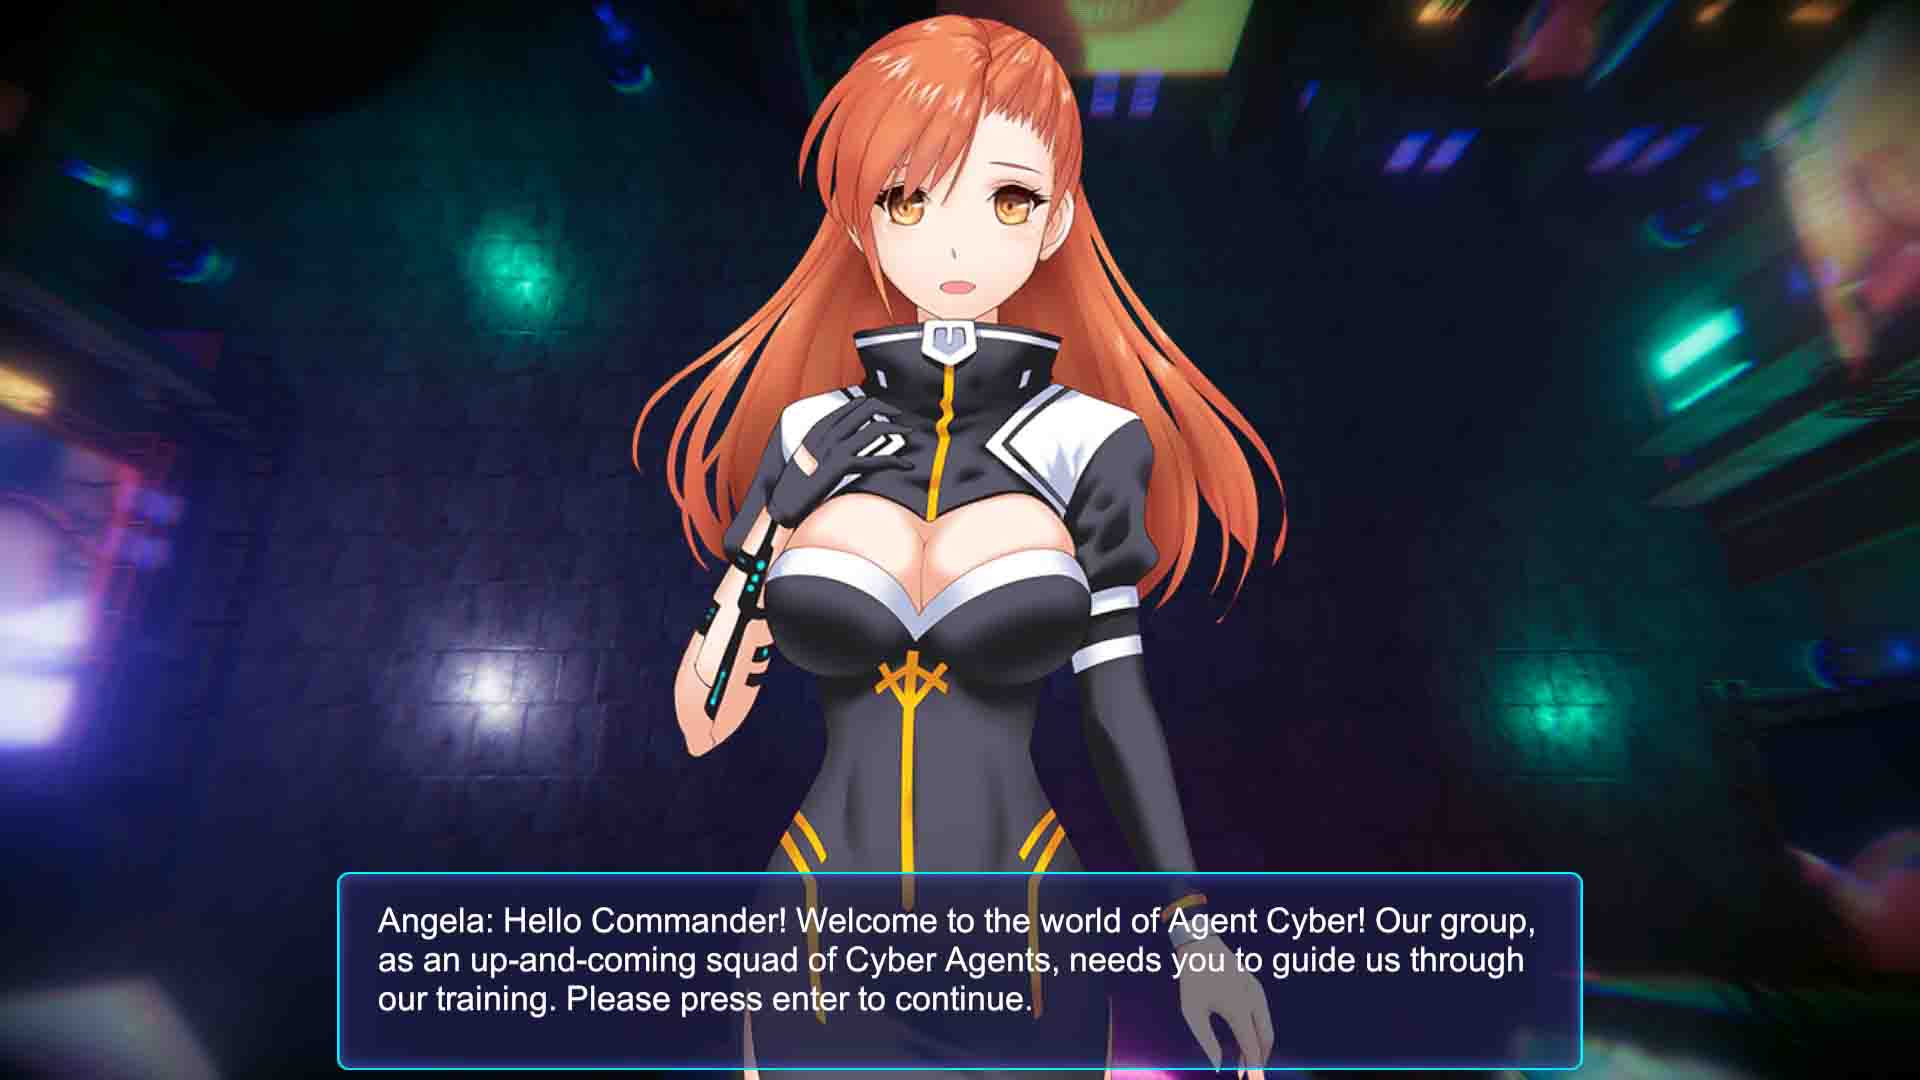 Rule 34 play. Кибер агент. Cyber Protego agent. Презентация игры Cyber age.